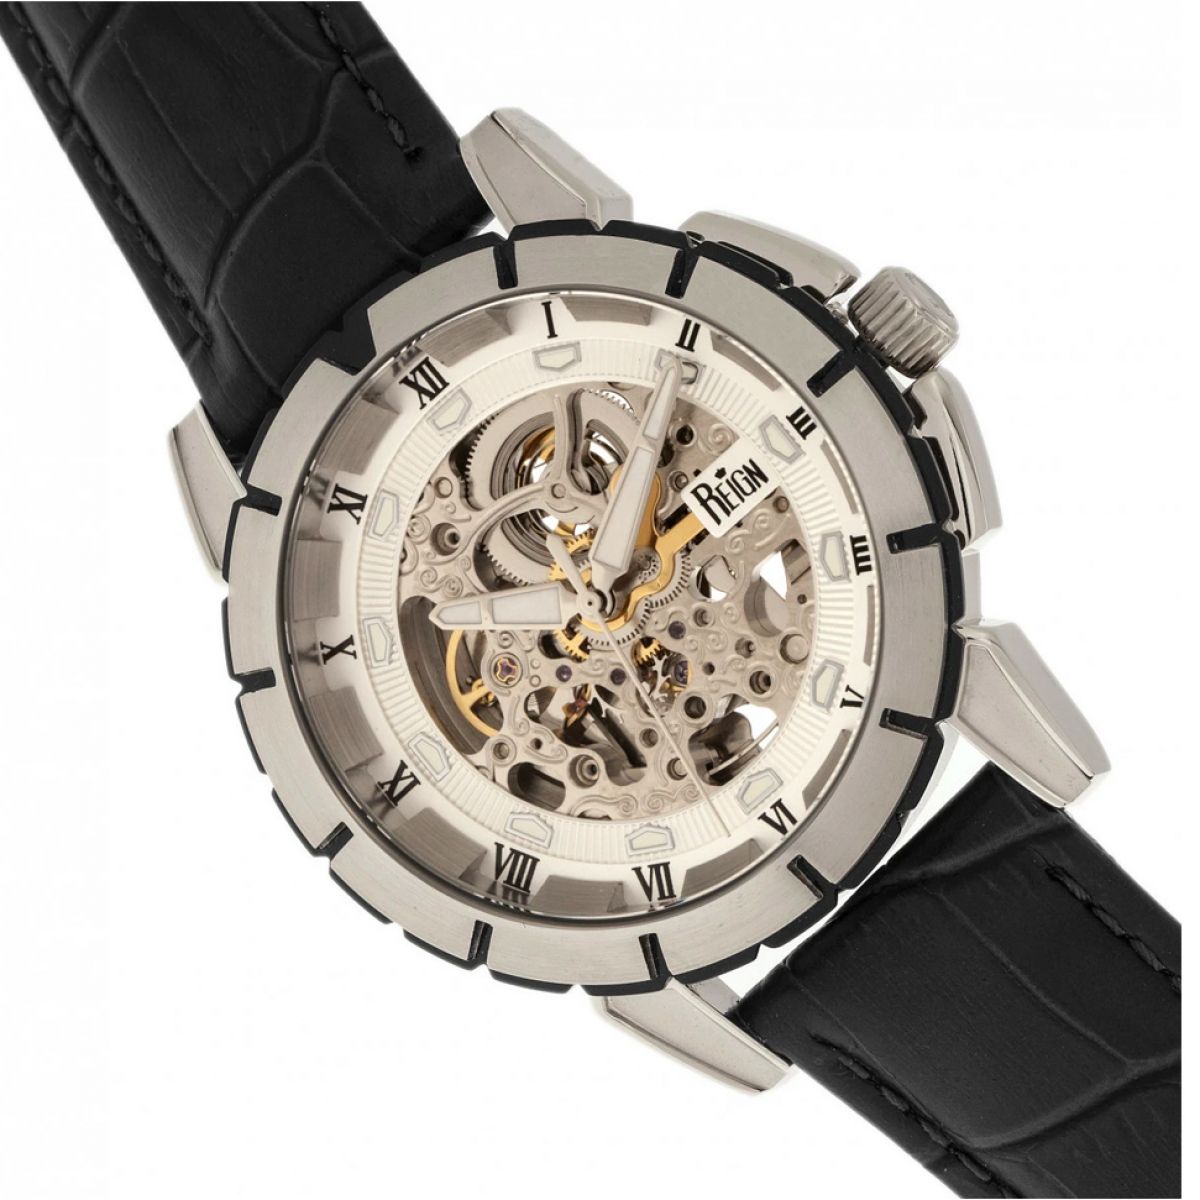 Reign Philippe Automatic | REIRN4603